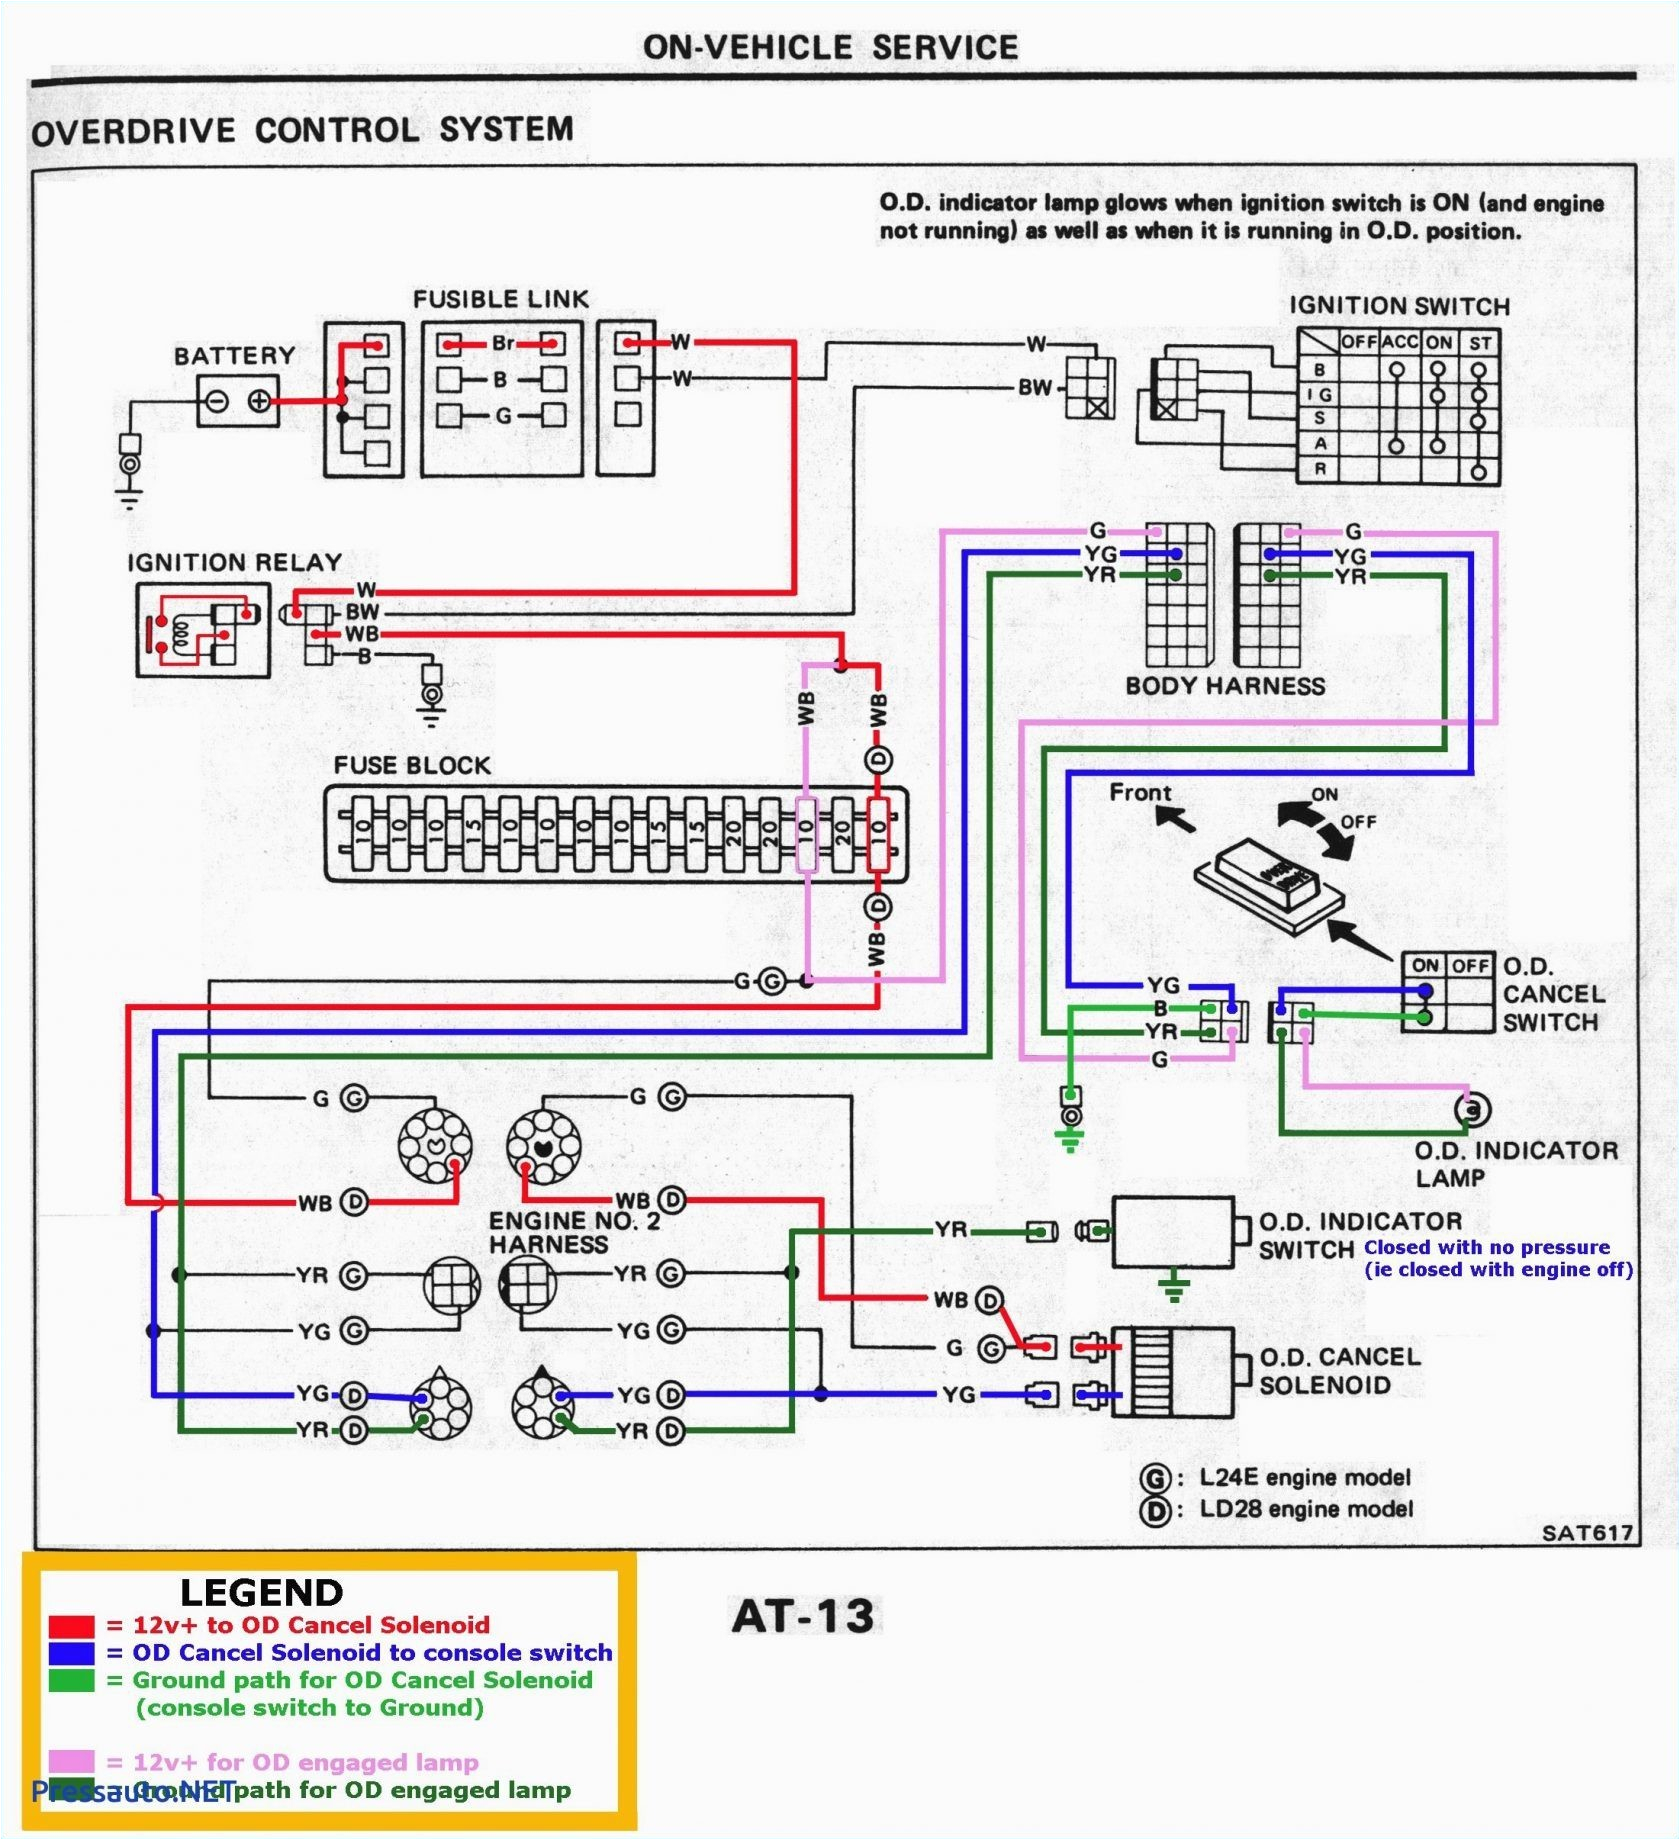 wiring diagram for 1969 camaro with ls1 electrical schematic wiring diagram for 1969 camaro with ls1